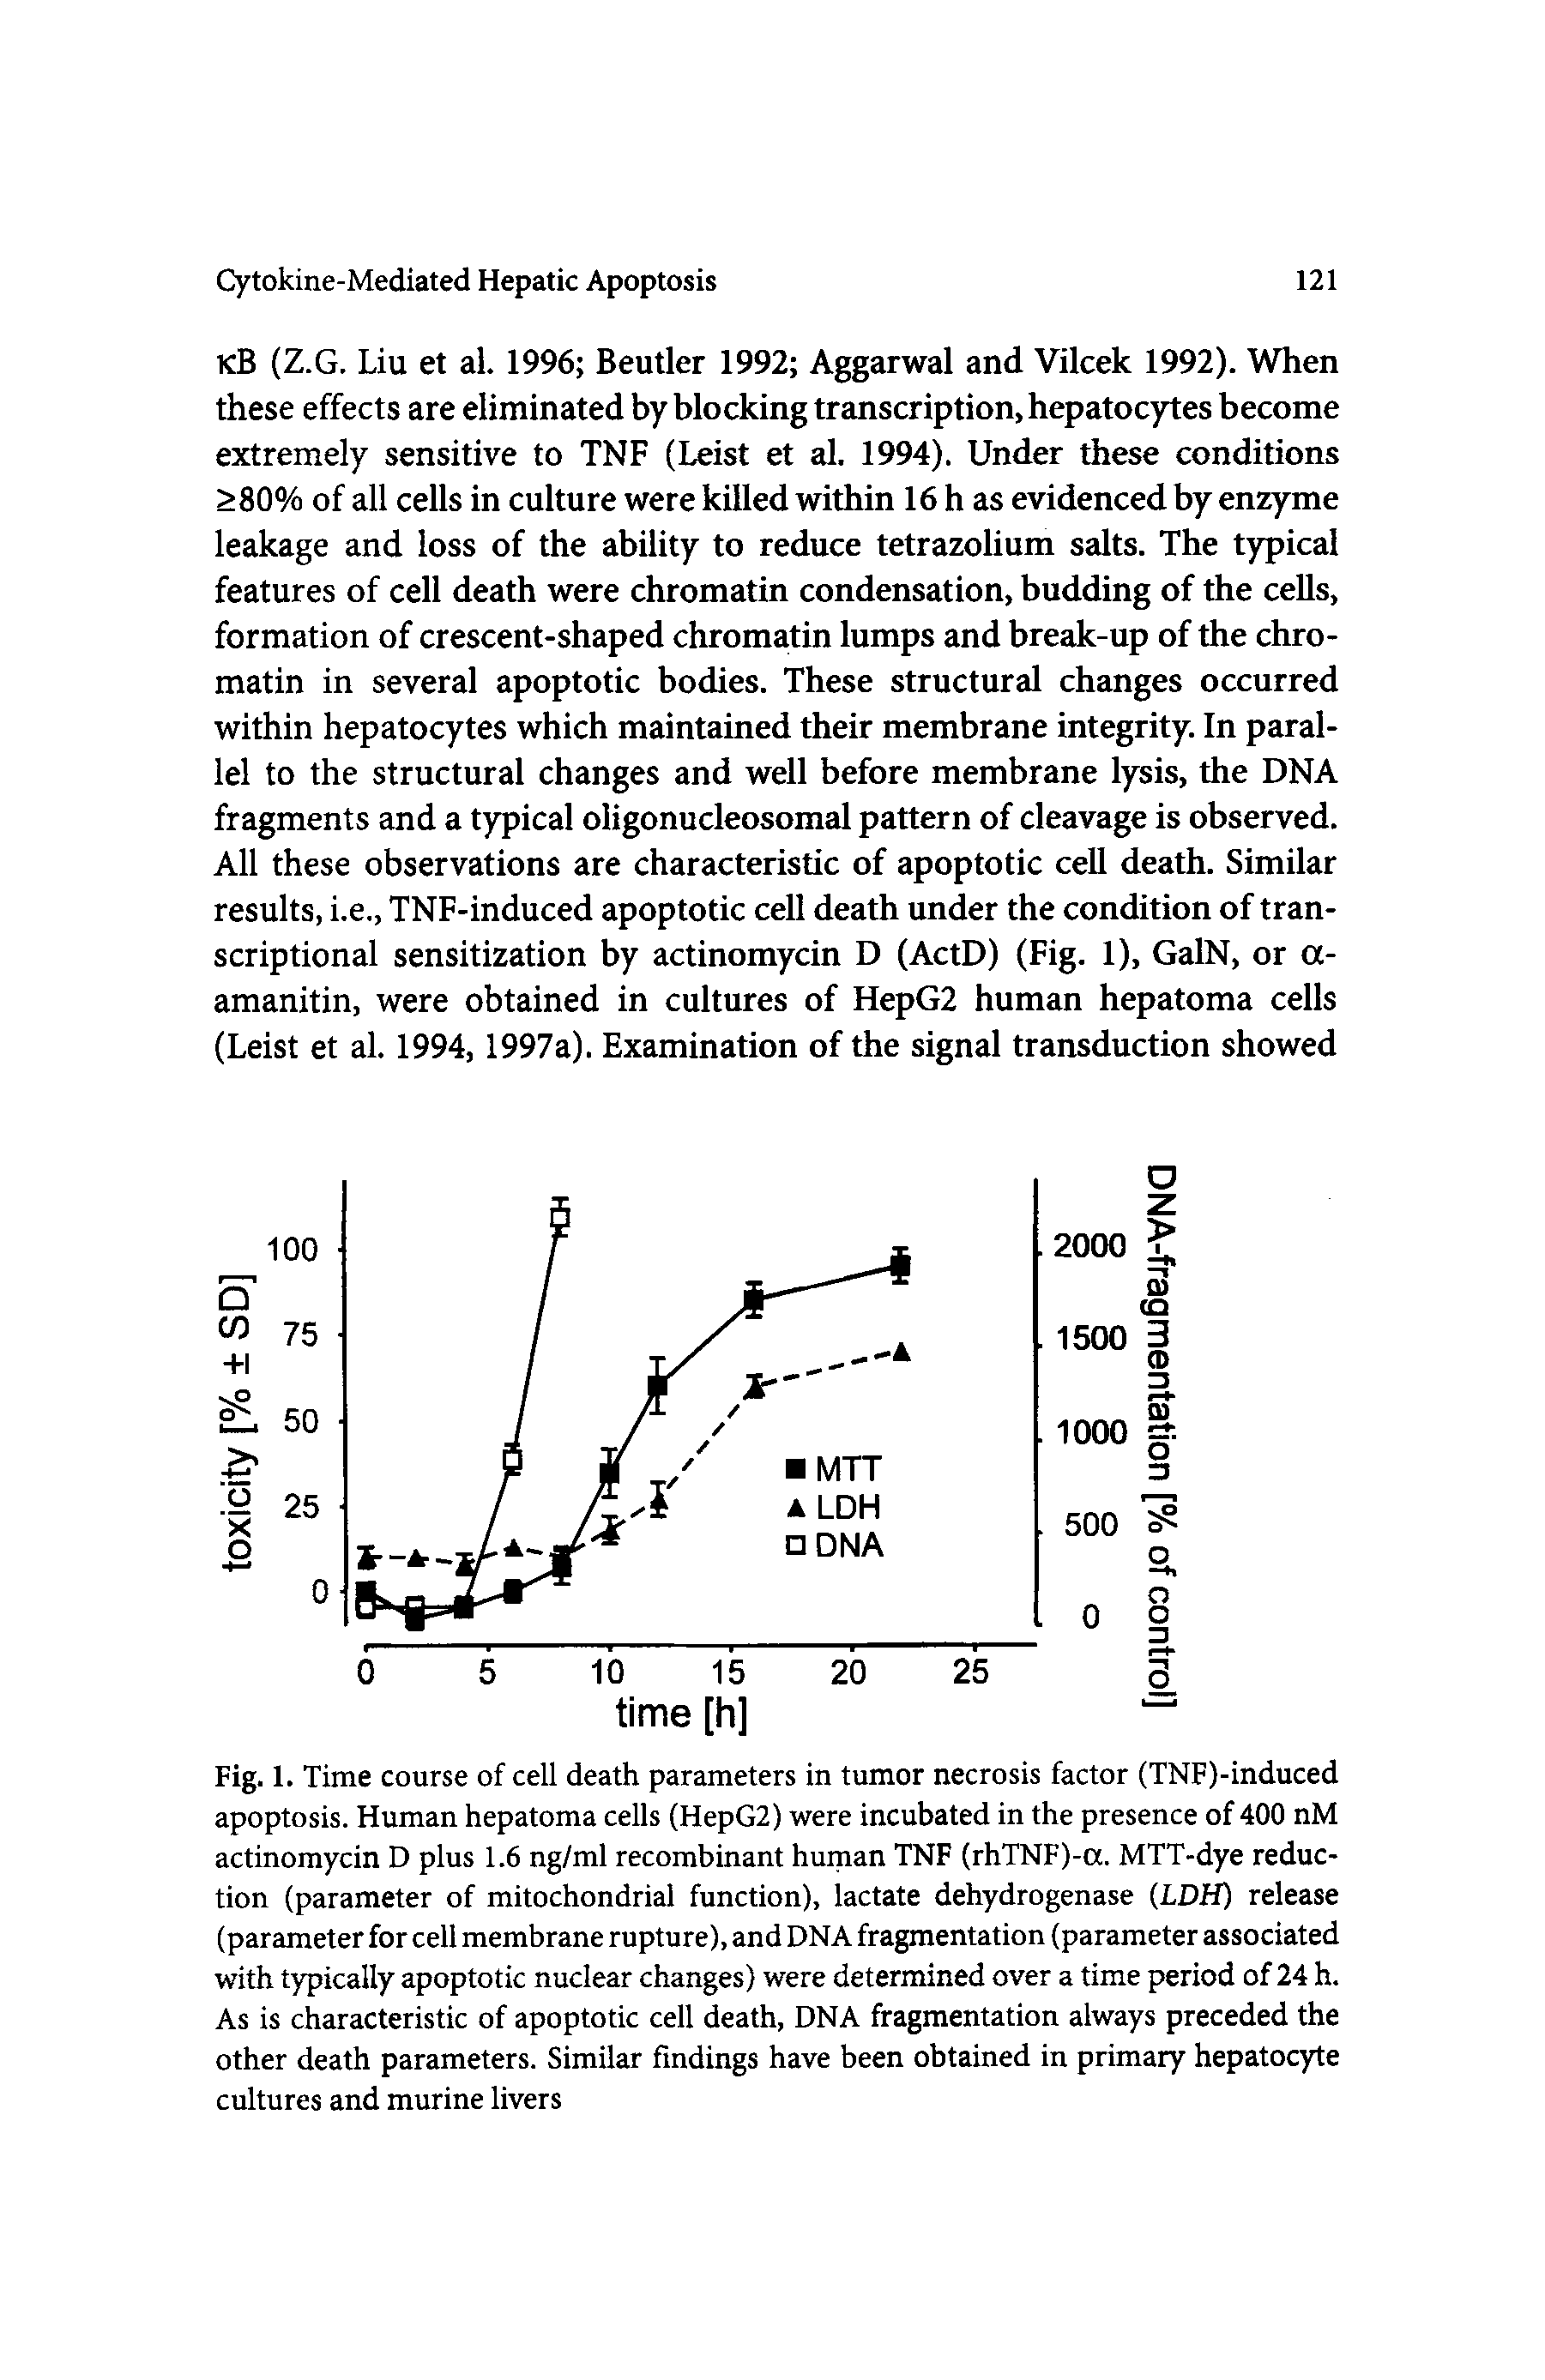 Fig. 1. Time course of cell death parameters in tumor necrosis factor (TNF)-induced apoptosis. Human hepatoma cells (HepG2) were incubated in the presence of 400 nM actinomycin D plus 1.6 ng/ml recombinant human TNF (rhTNF)-a. MTT-dye reduction (parameter of mitochondrial function), lactate dehydrogenase (LDH) release (parameter for cell membrane rupture), and DNA fragmentation (parameter associated with typically apoptotic nuclear changes) were determined over a time period of 24 h. As is characteristic of apoptotic cell death, DNA fragmentation always preceded the other death parameters. Similar findings have been obtained in primary hepatocyte cultures and murine livers...